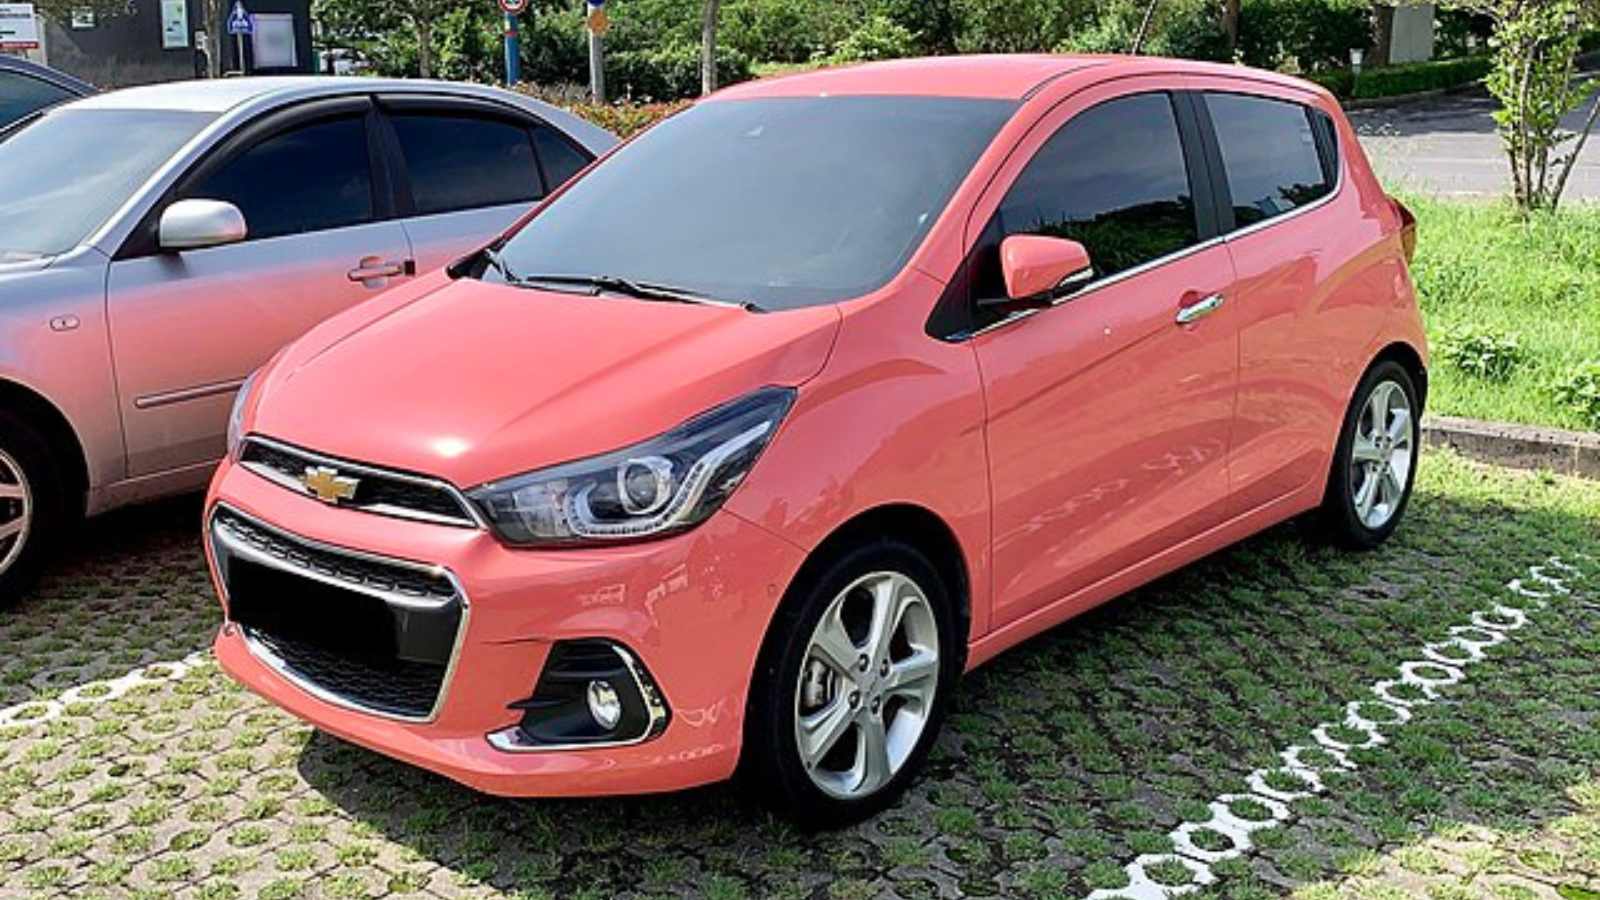 <p>The Chevrolet Spark is the most affordable option if you don’t mind driving a subcompact or very small car. Although it costs around $12,000 to purchase, this little automobile has exceptional fuel efficiency and has shown to bequite<a href="https://maxmymoney.org/that-car-is-a-red-flag-people-assume-youre-a-jerk-if-you-drive-these-cars/" rel="noopener">trustworthy and durable</a>. This car’s inexpensive and readily replaced parts contribute to its low maintenance expenses.But keep in mind that this is a small automobile, sothe insidewon’tbetoo roomy.</p> <p>This car has a limited amount of legroom. Nevertheless, the money you’ll save by using this automobile for commuting around town makes comfort a minor trade-off.</p>